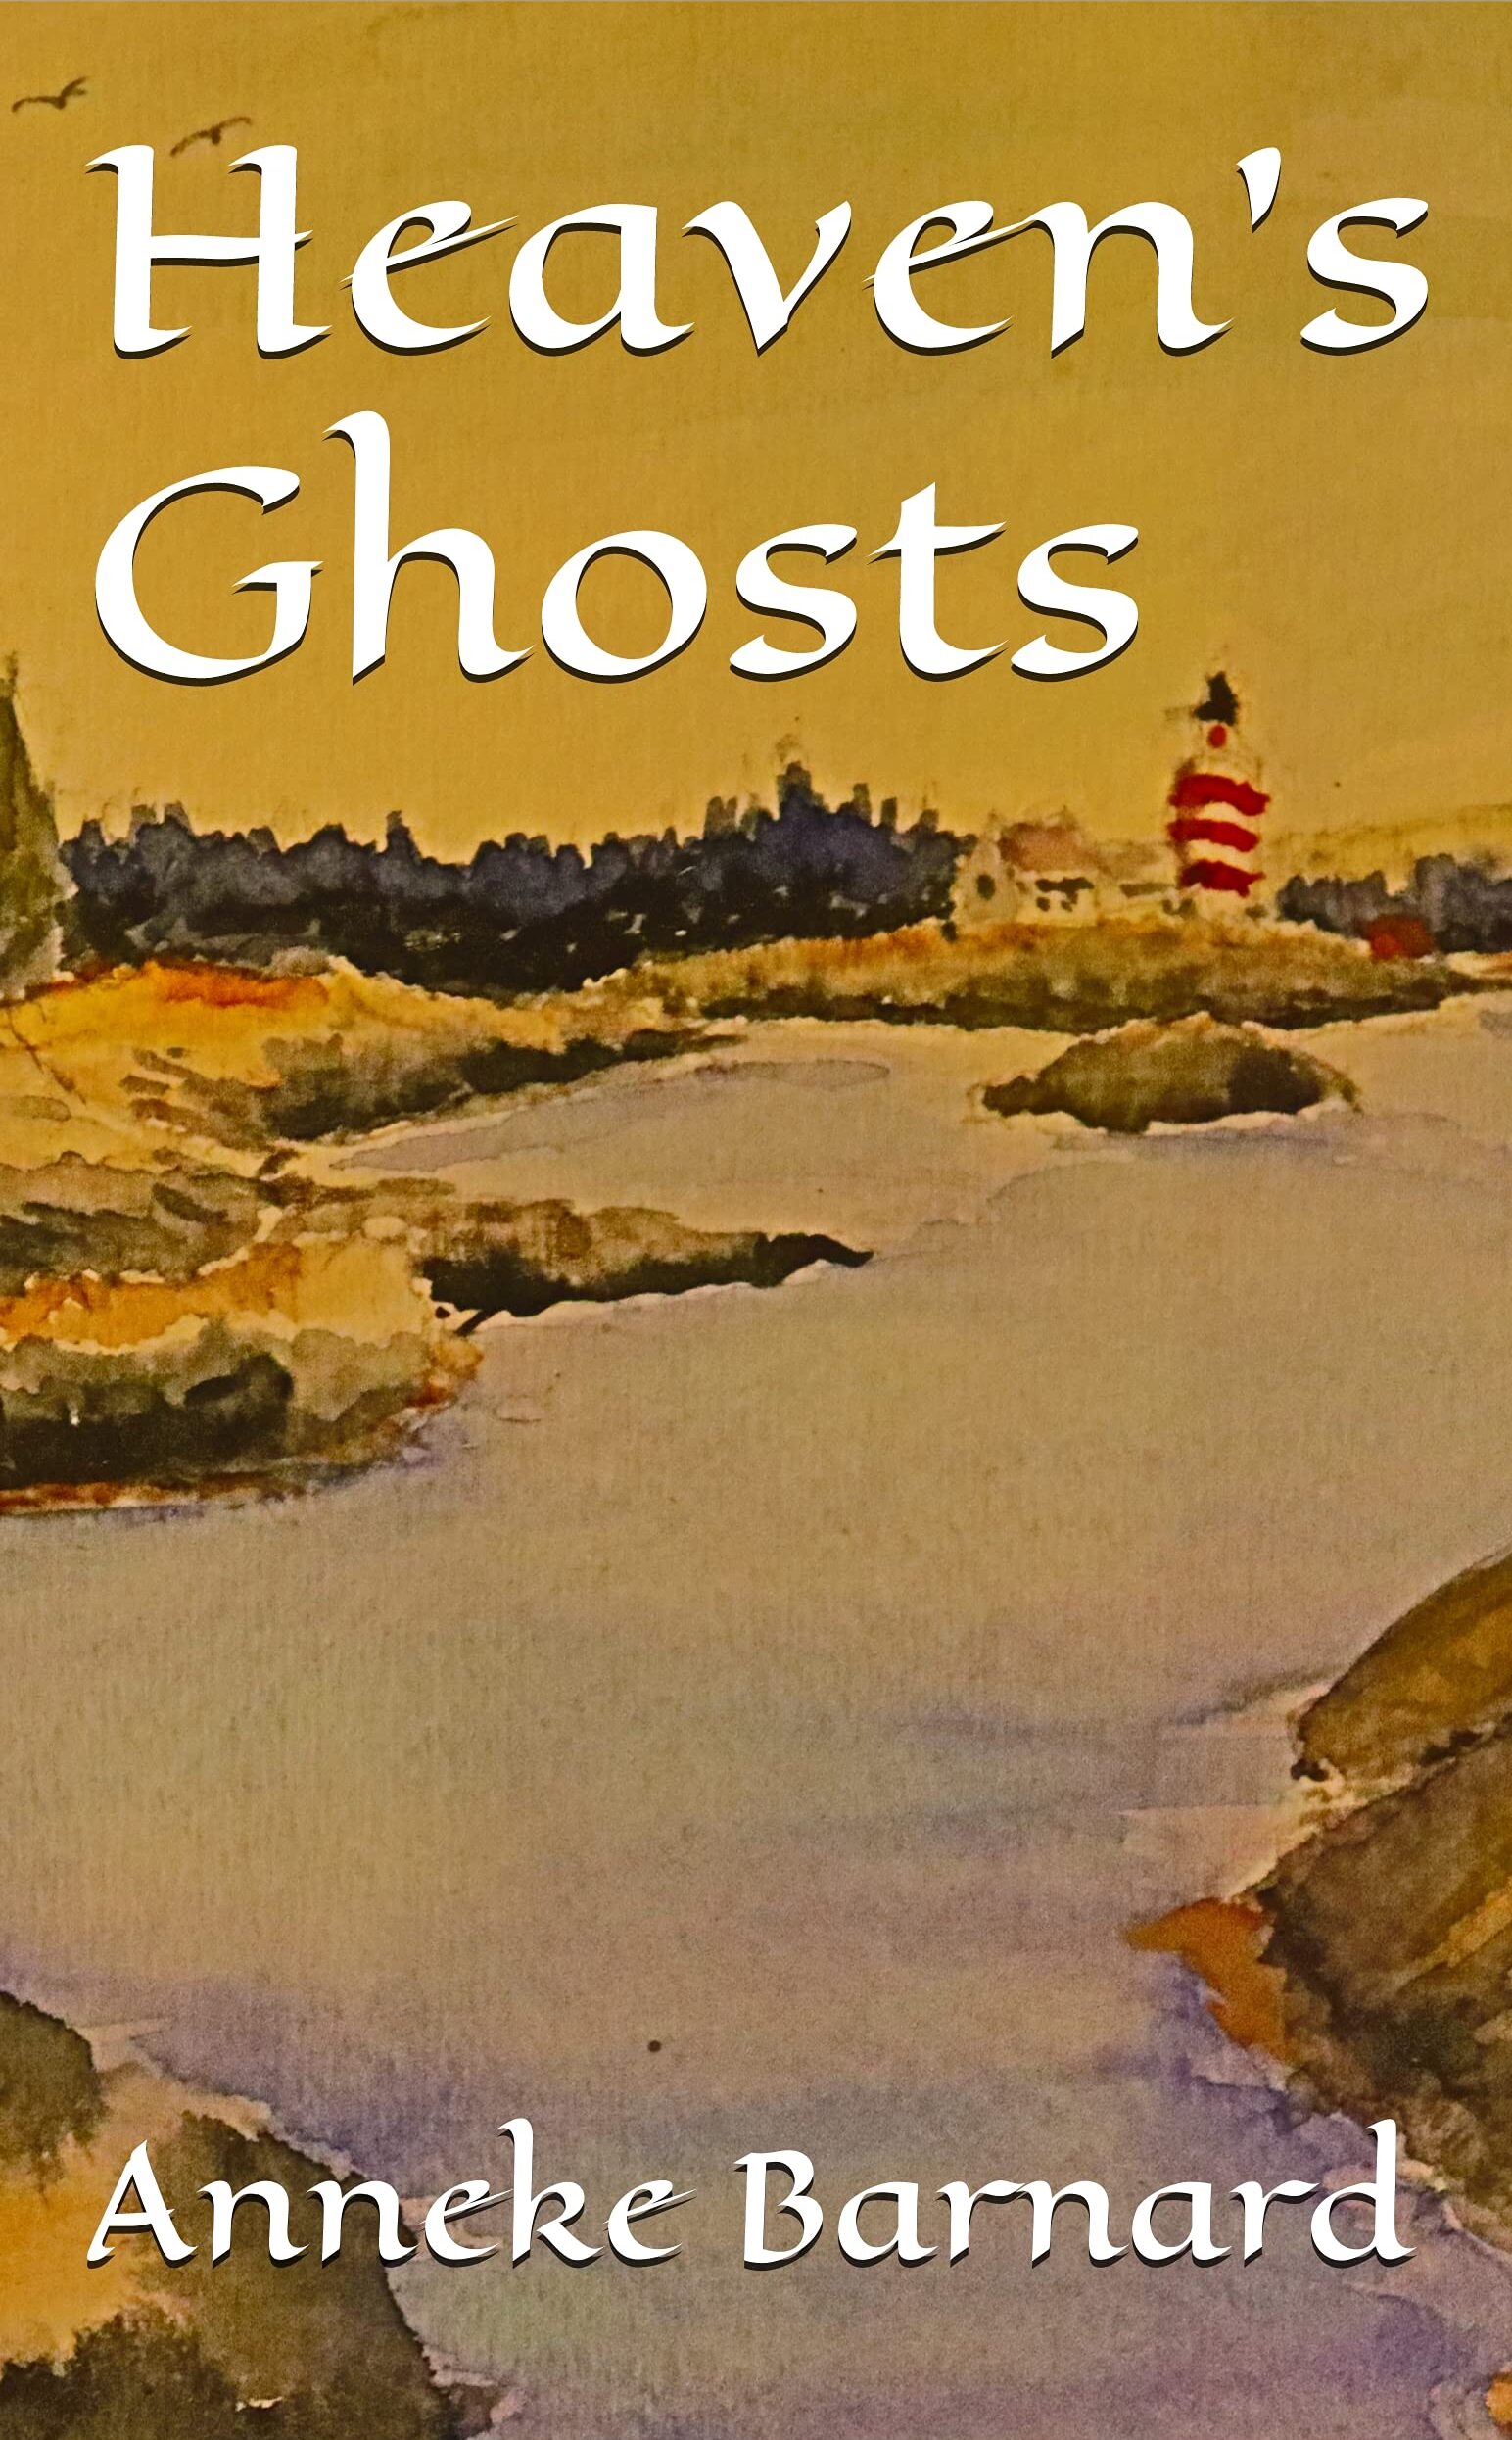 An alternate front cover for Heaven's Ghosts by Anneke Barnard